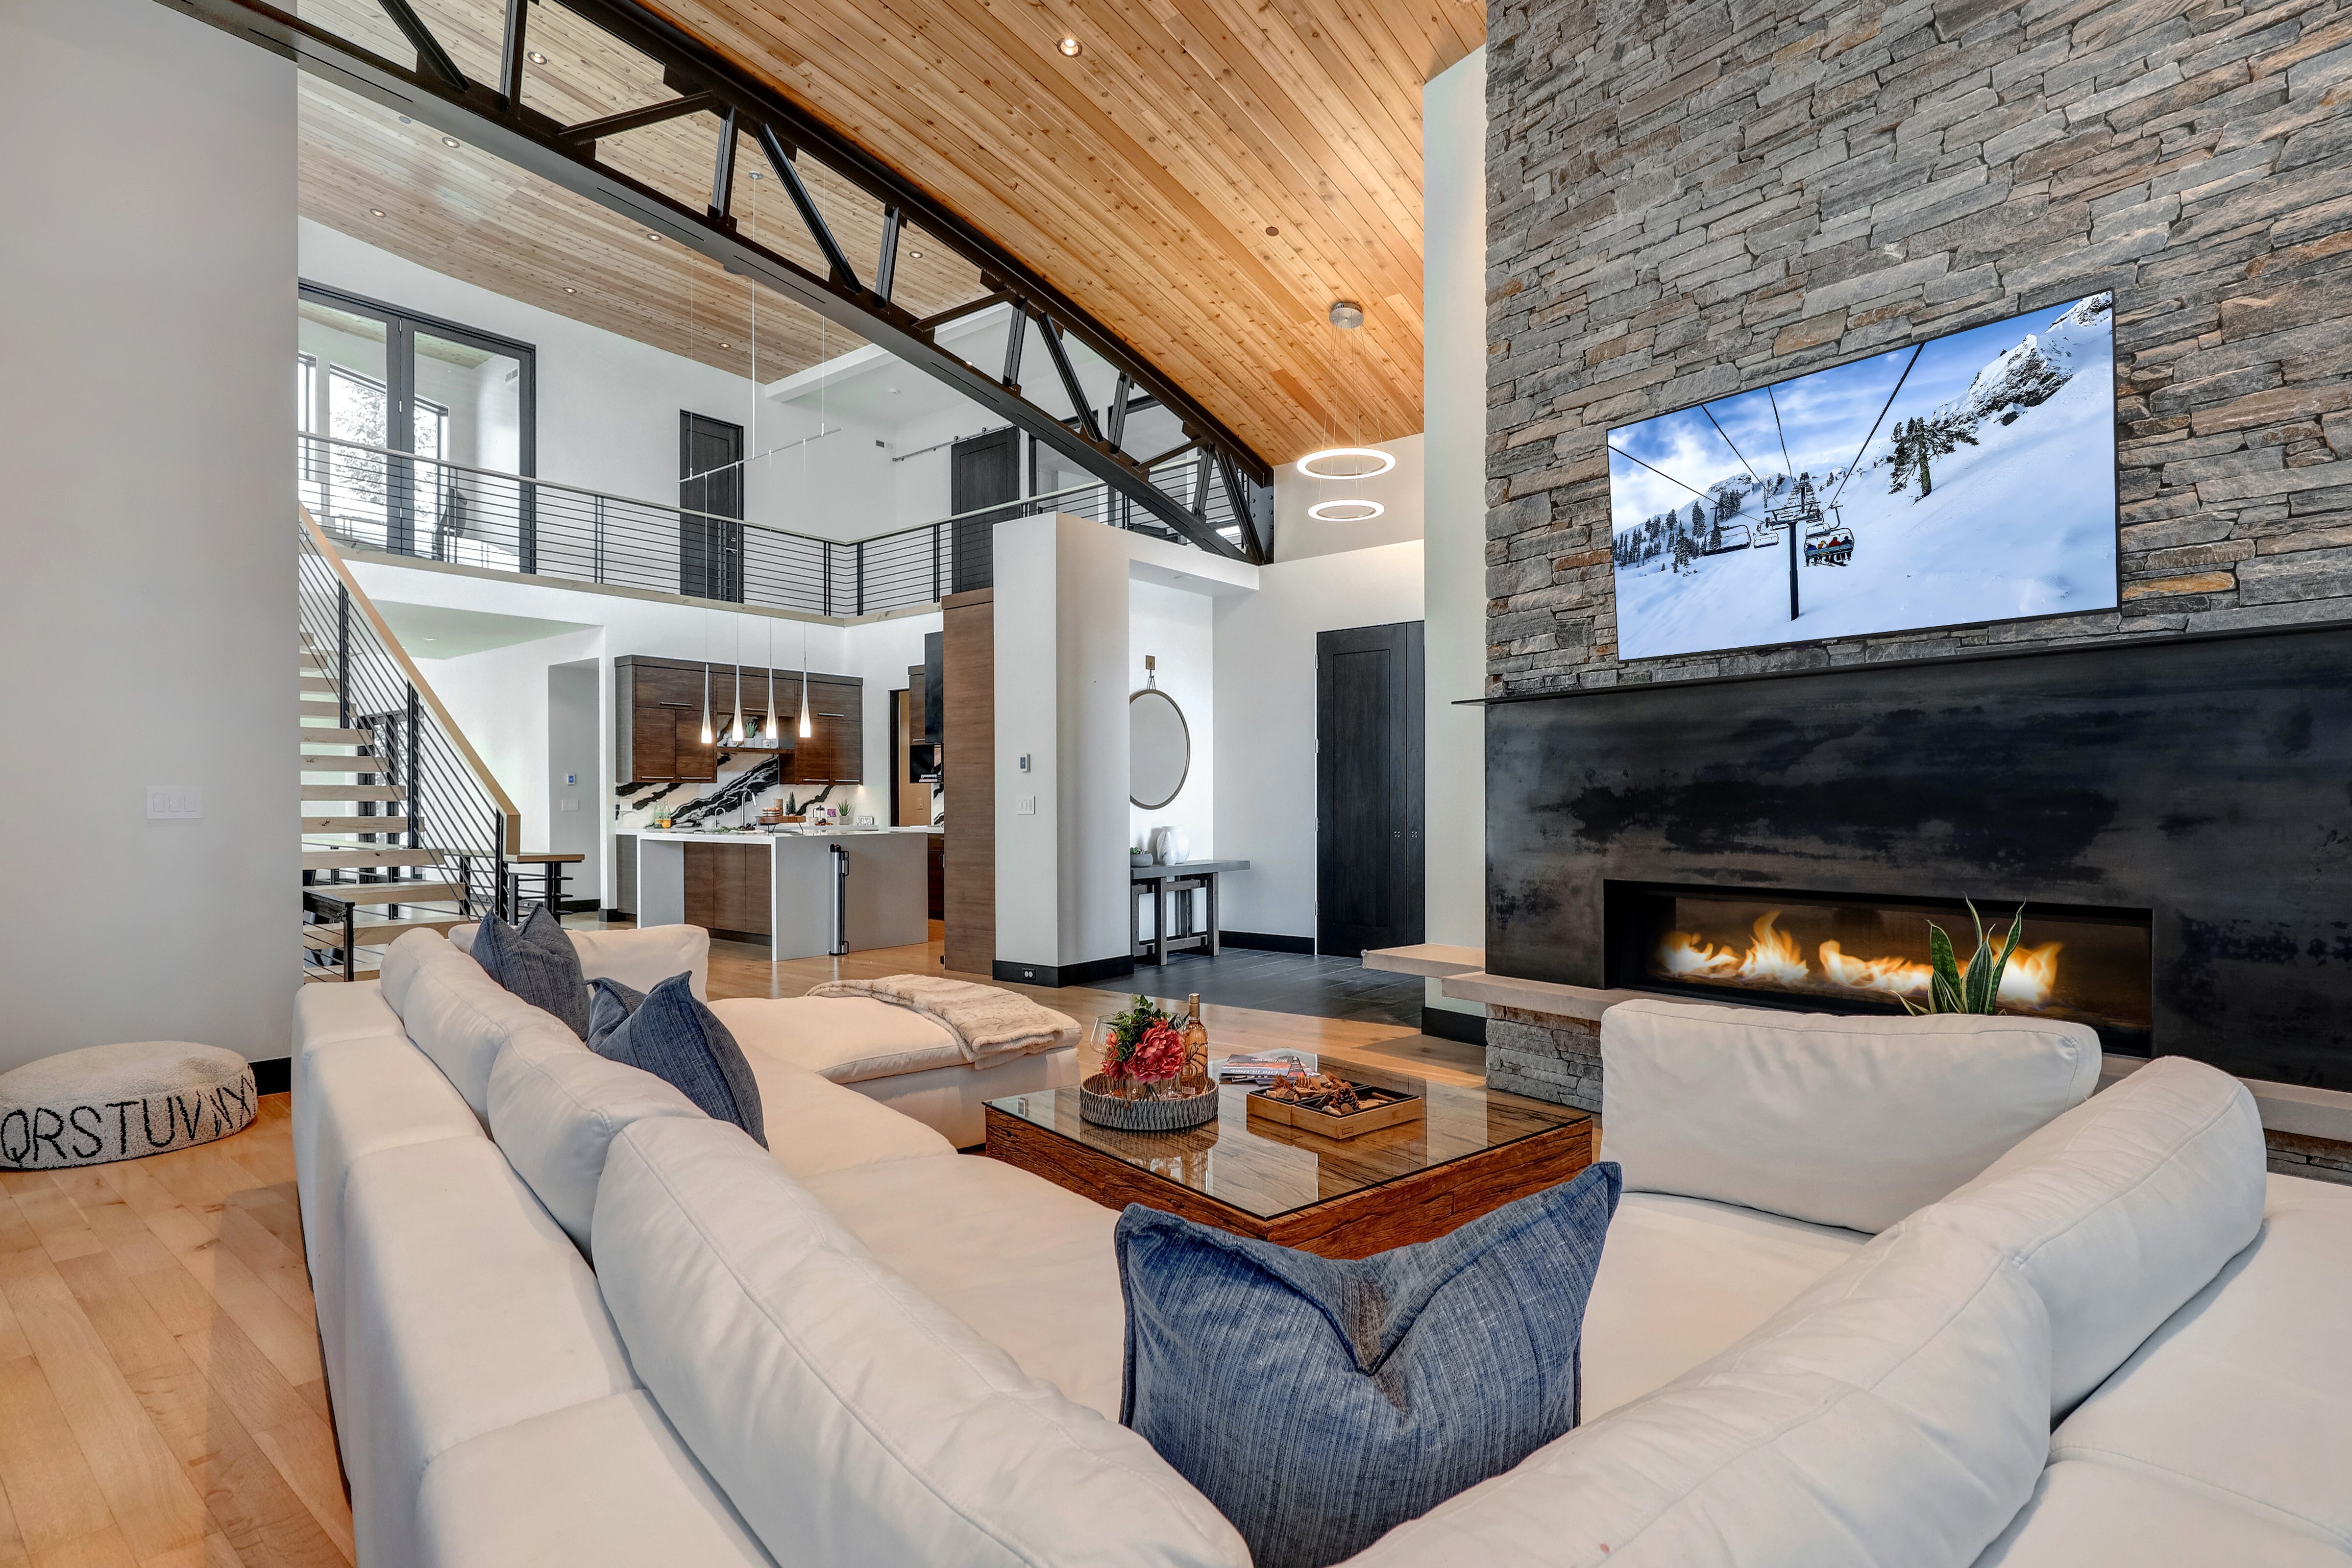 Main Level Living Room with vaulted ceilings, plush over-sized sectional, 65" Samsung TV, elegant gas fireplace, and indoor/outdoor glass patio doors